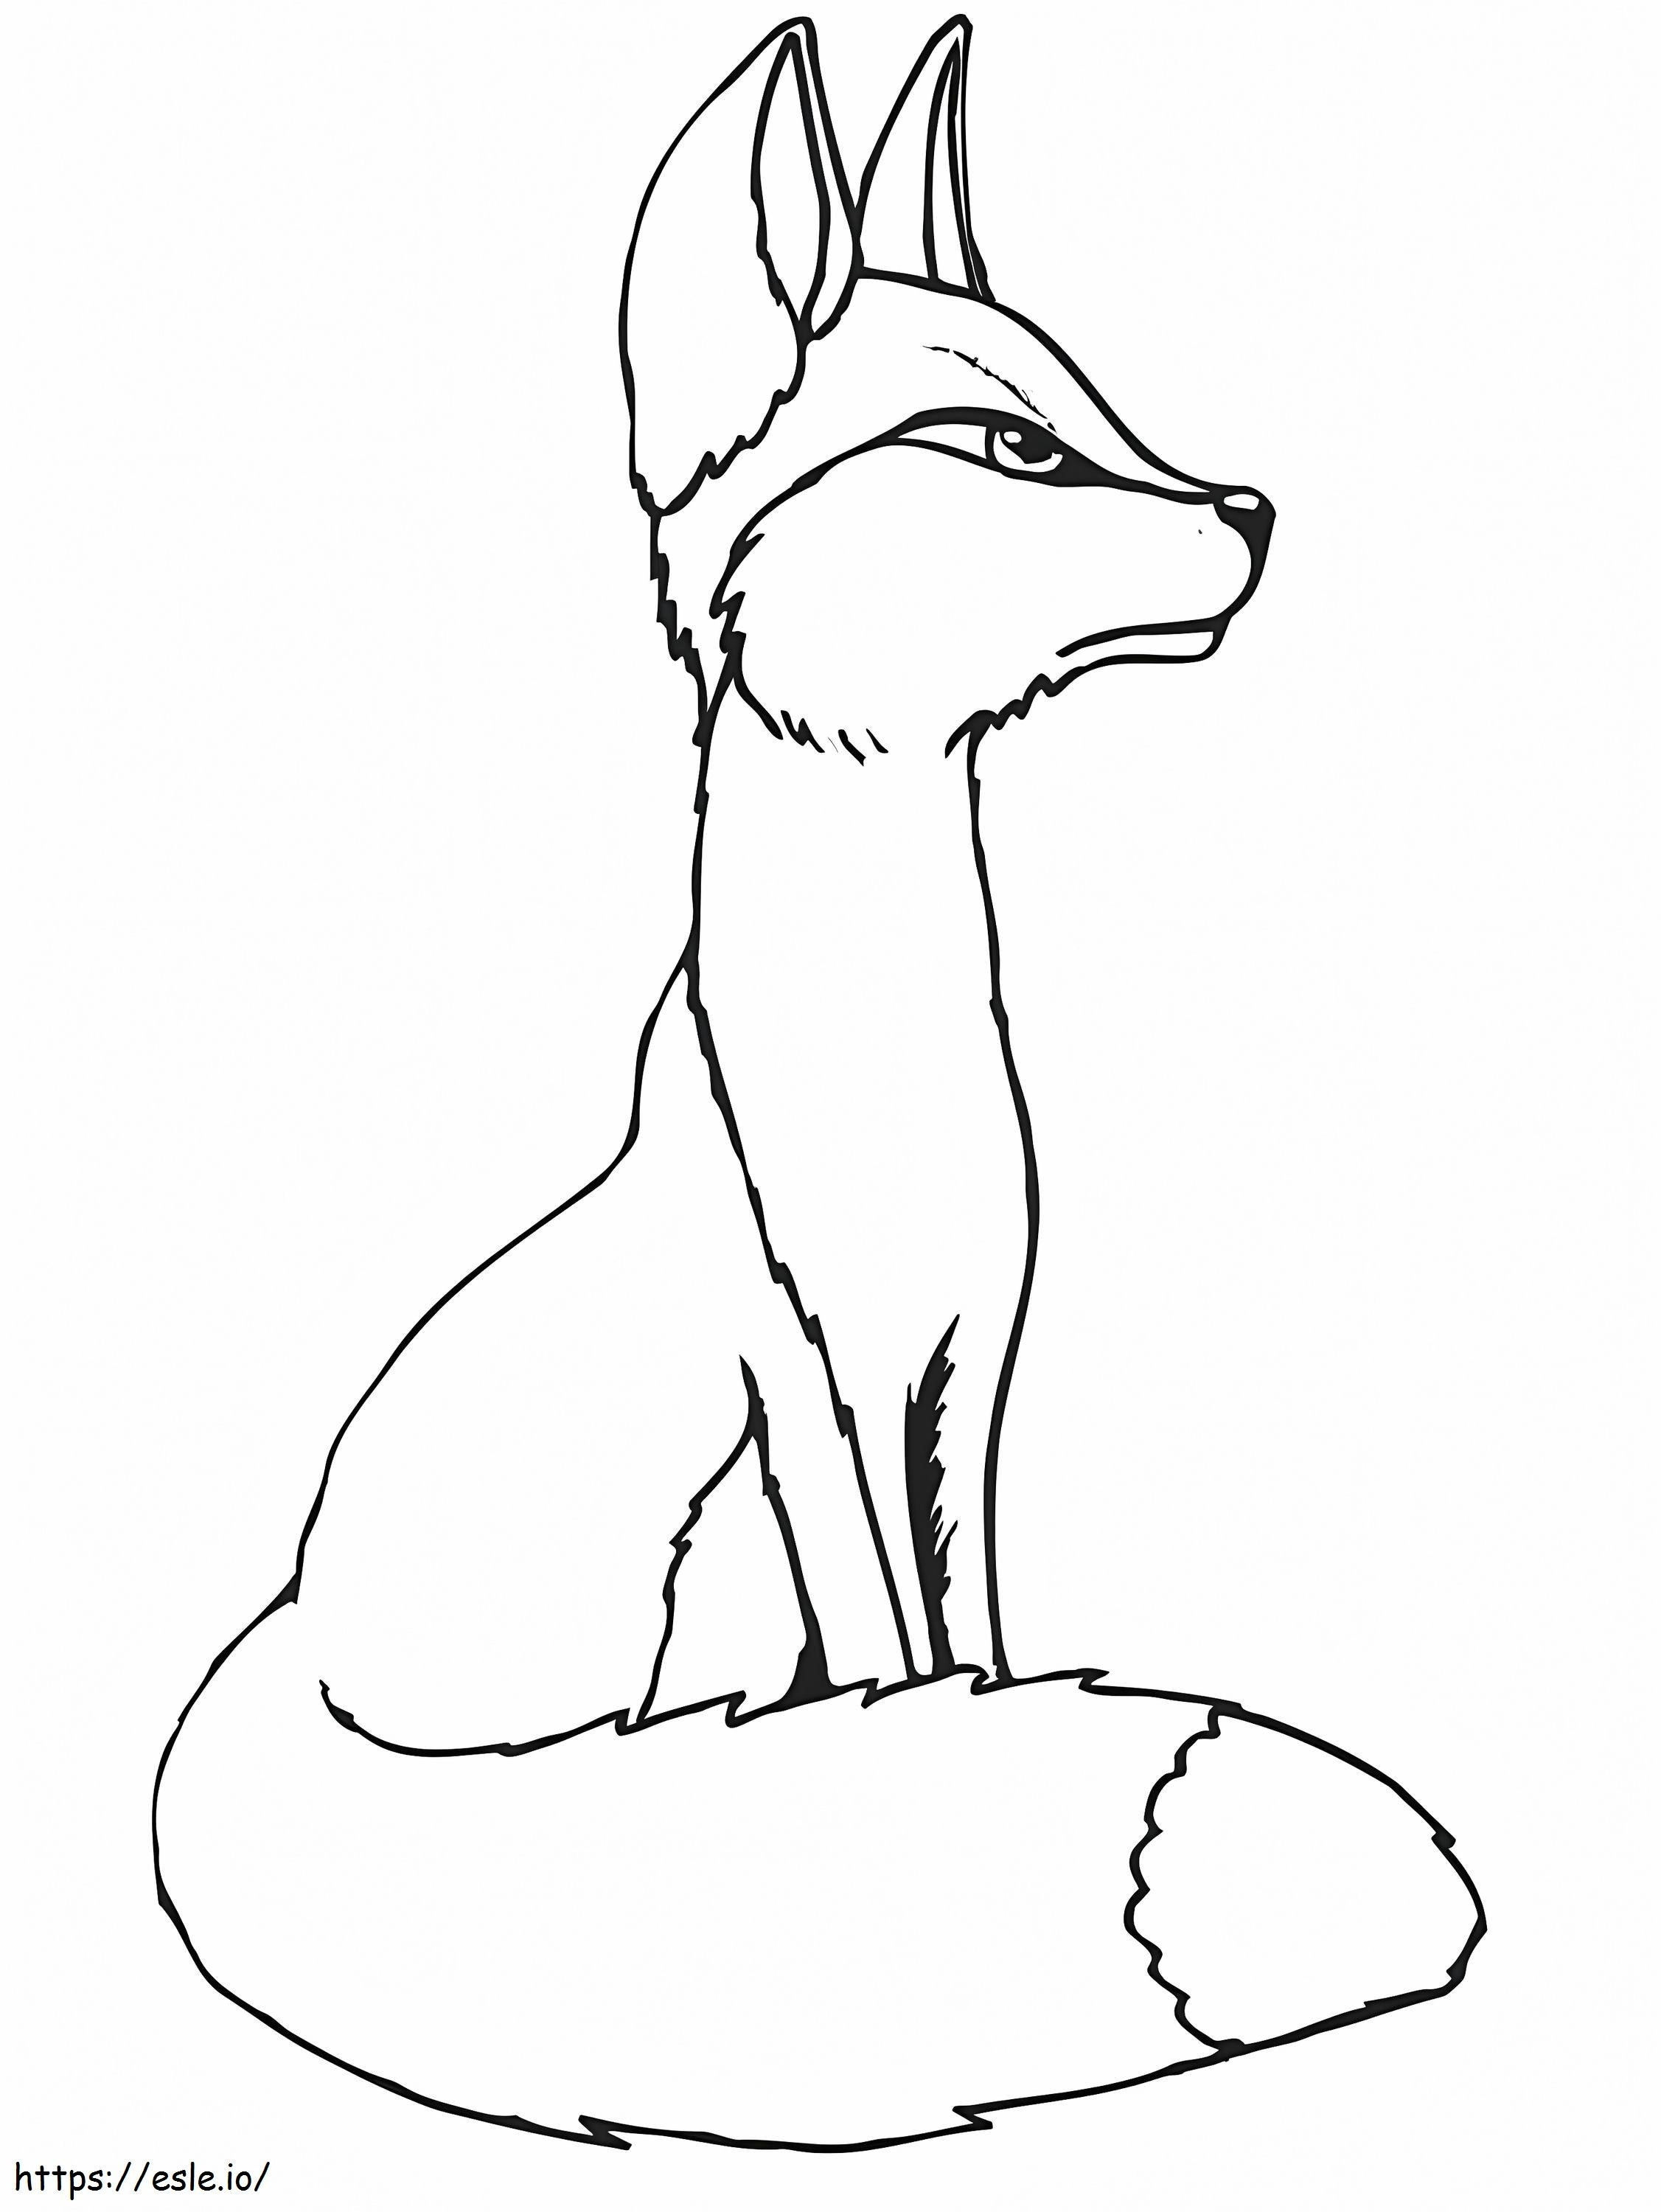 One Red Fox coloring page